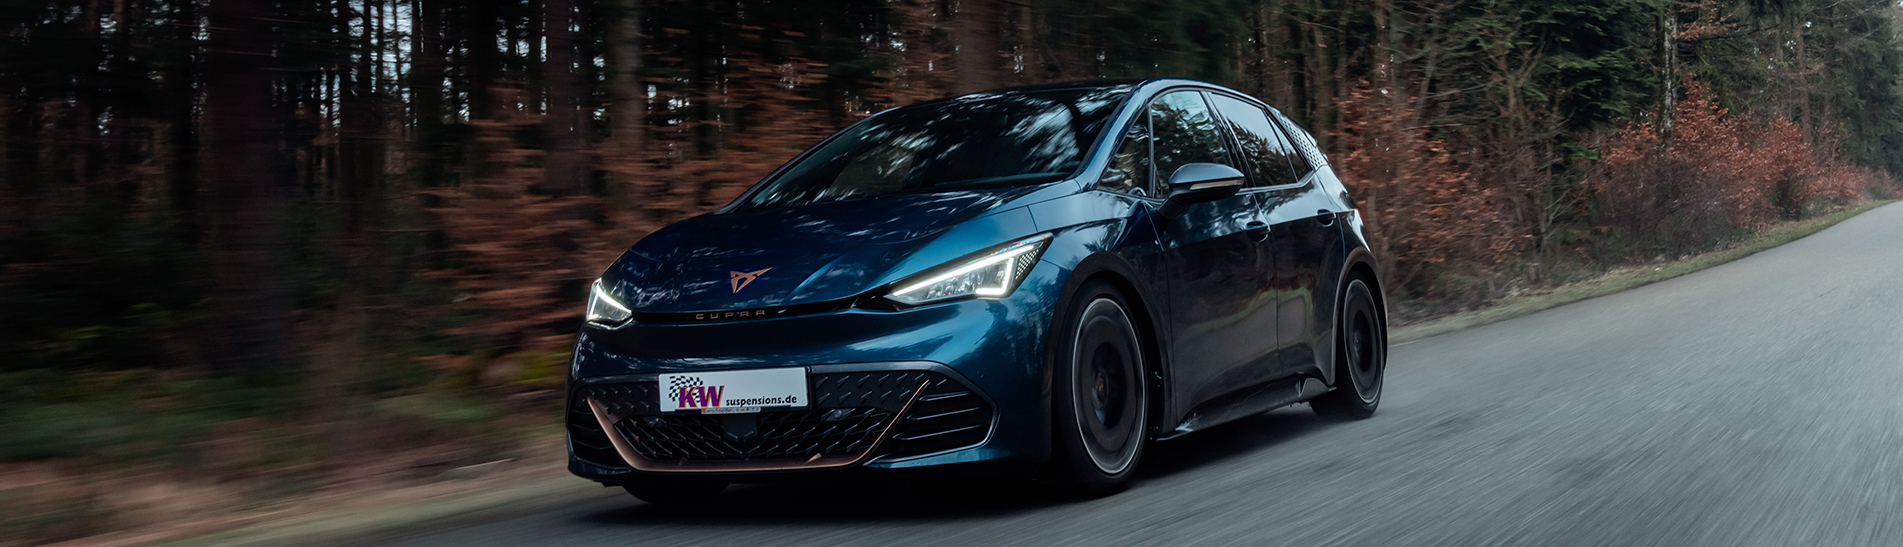 An increasing number of drivers of electric cars, such as the Tesla Model 3, are buying automotive accessories. Now KW coilovers are also available for the Cupra Born electric car.